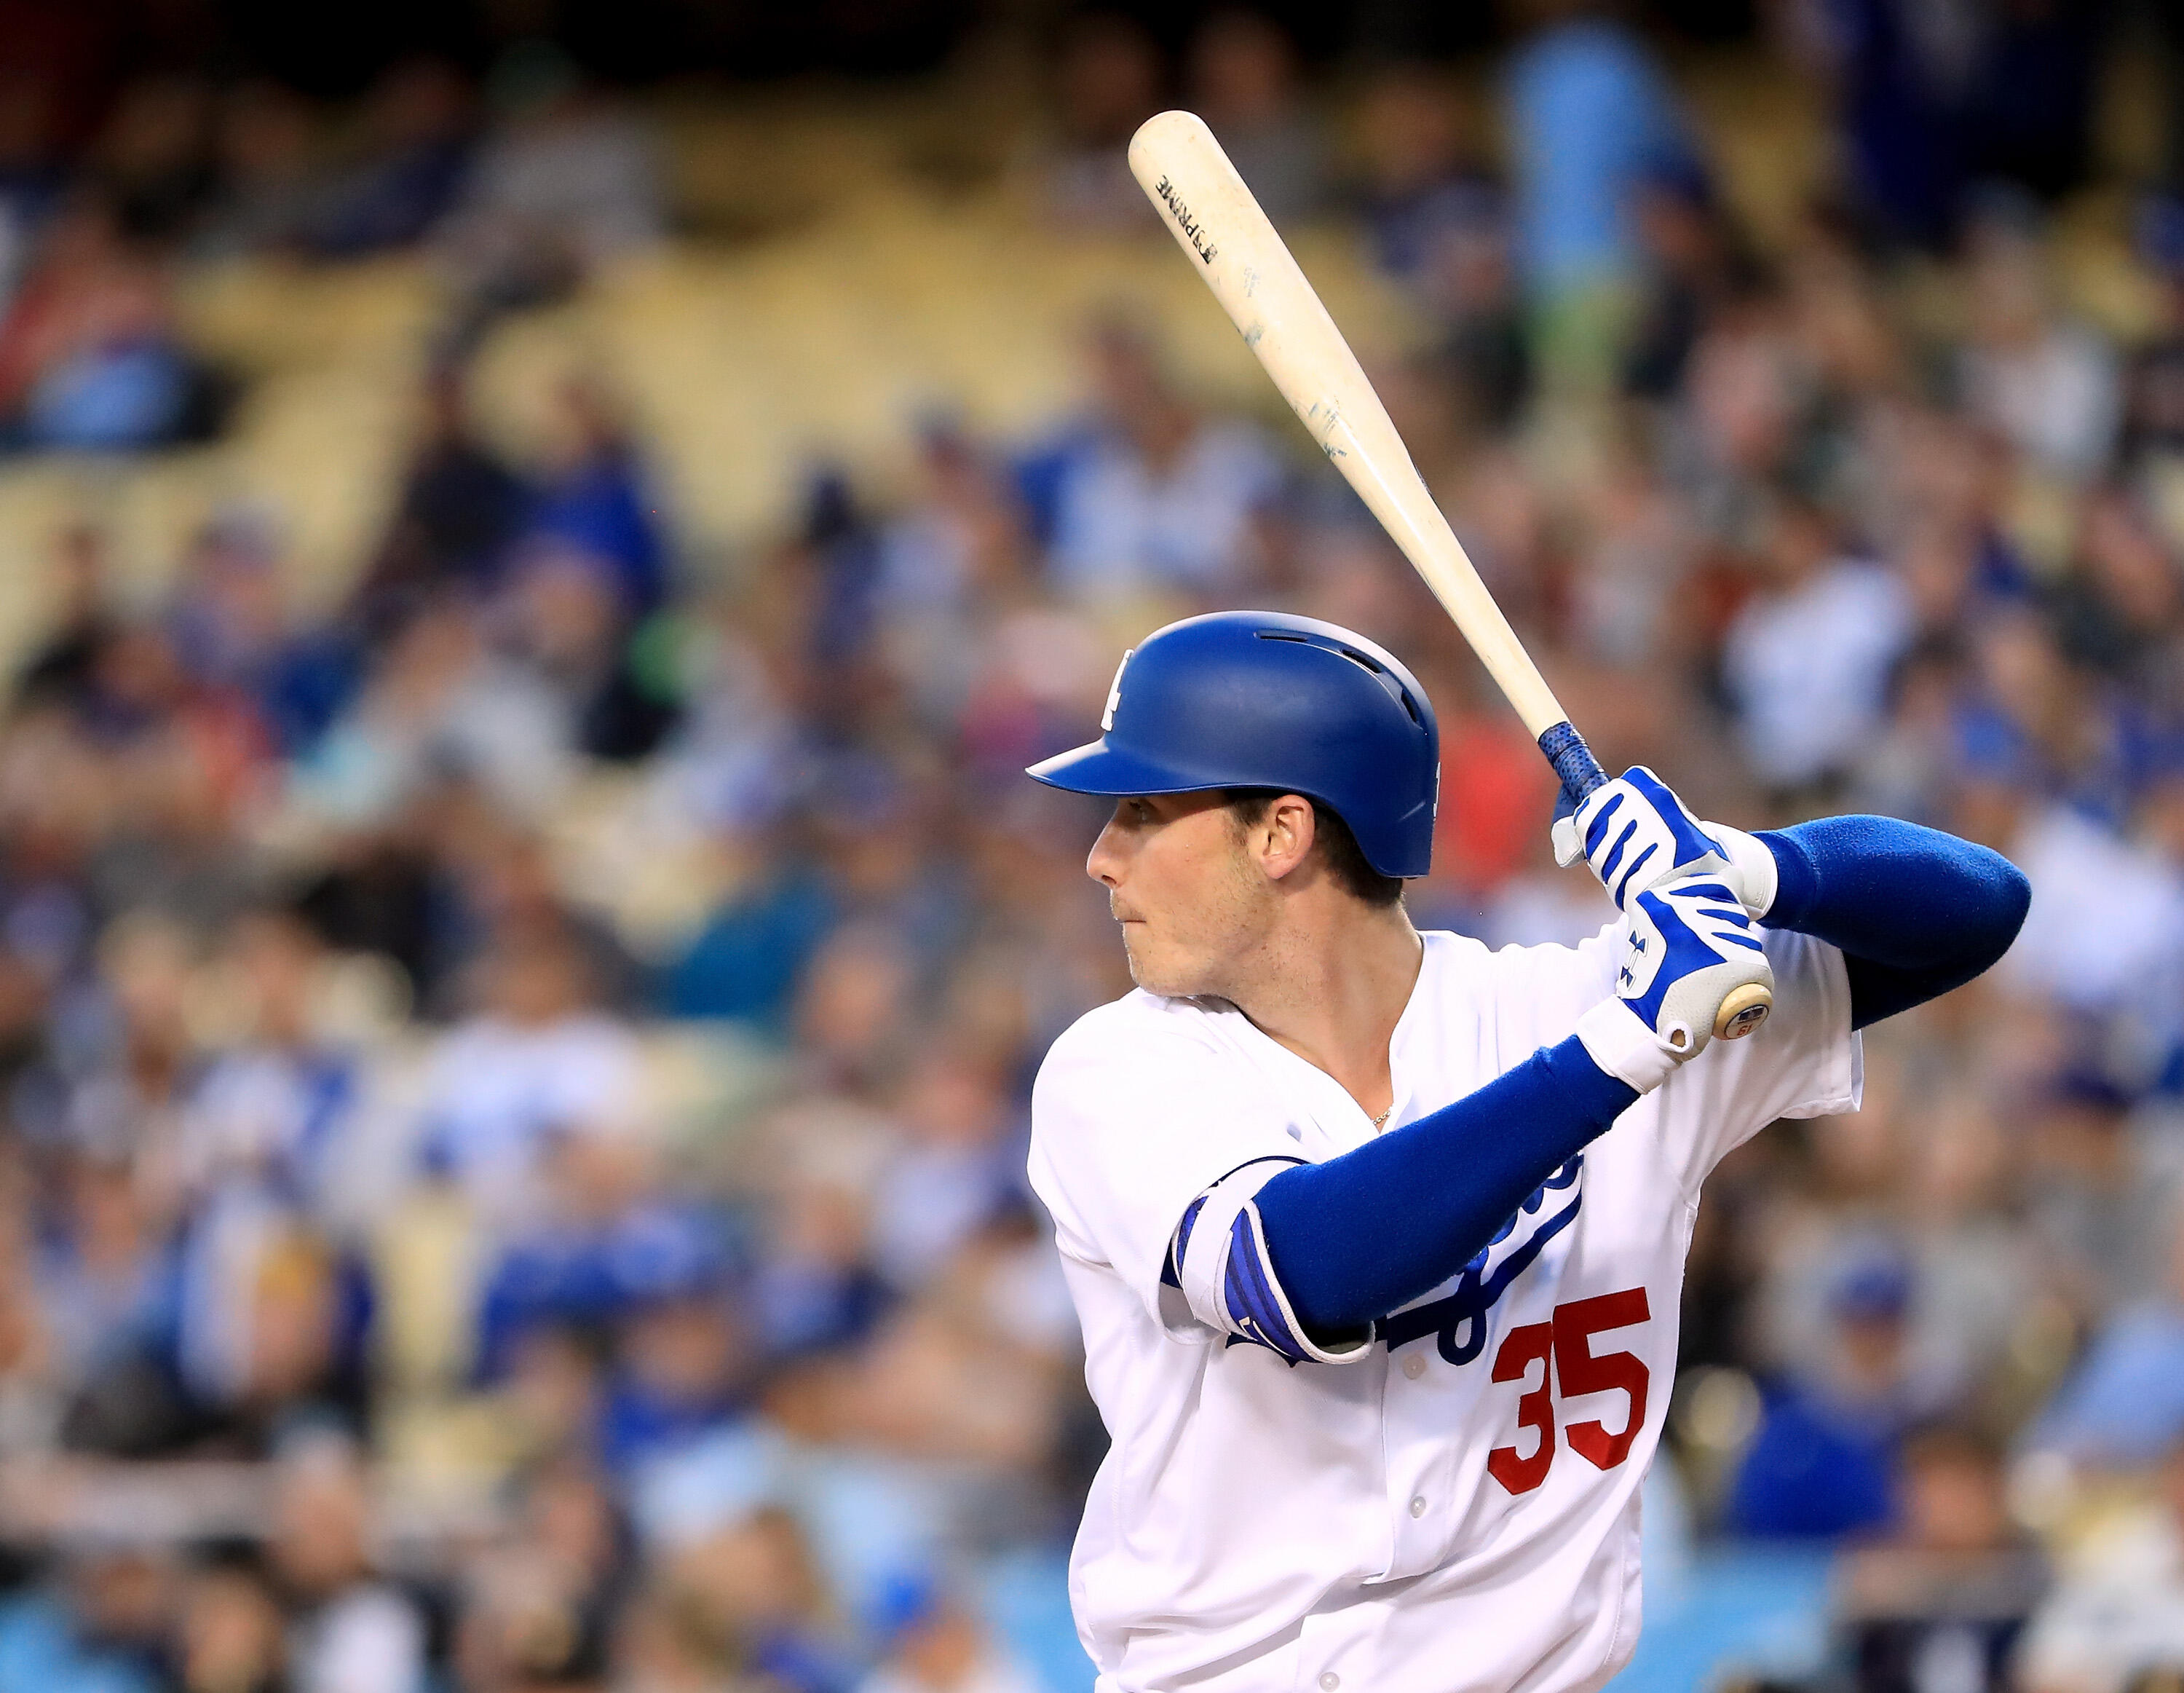 LOS ANGELES, CA - MAY 08:  Cody Bellinger #35 of the Los Angeles Dodgers at bat during the first inning against the Pittsburgh Pirates at Dodger Stadium on May 8, 2017 in Los Angeles, California.  (Photo by Harry How/Getty Images)